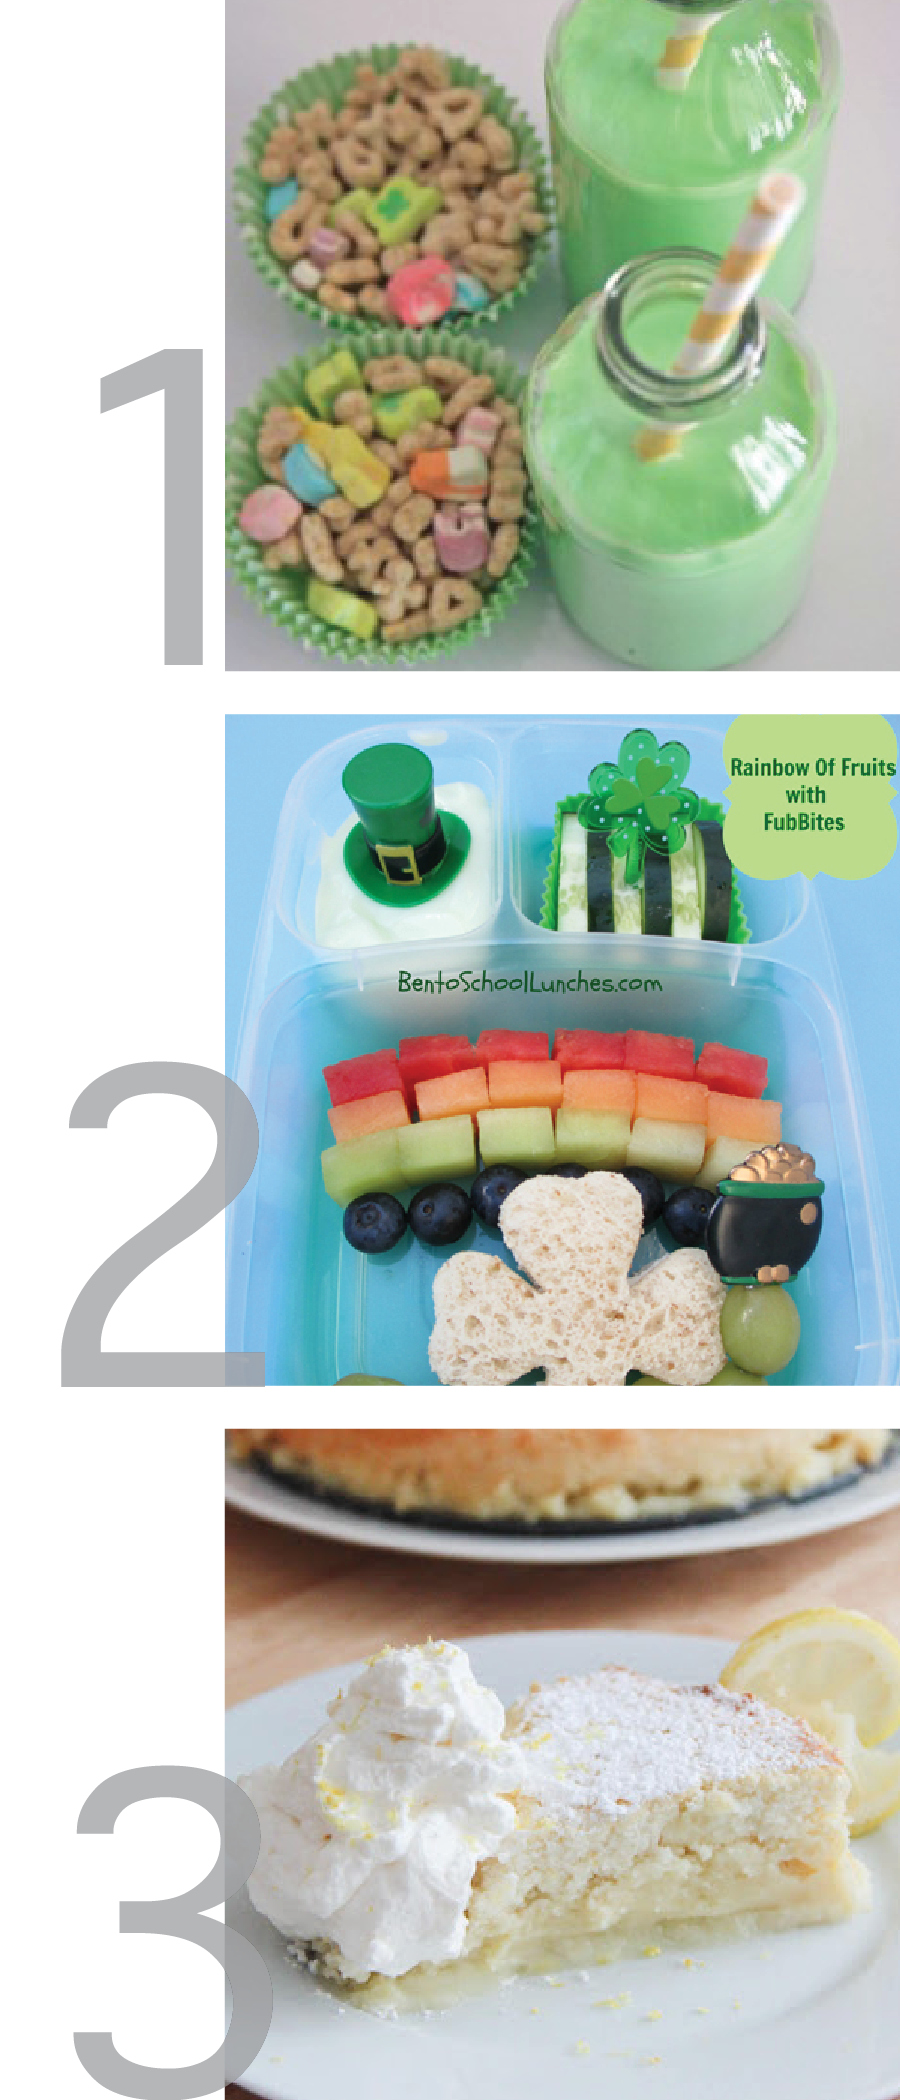 this photo is a graphic of images of the following st. patrick's day recipes, leprechaun breakfast, st. patrick's day bento lunch box and irish lemon pudding